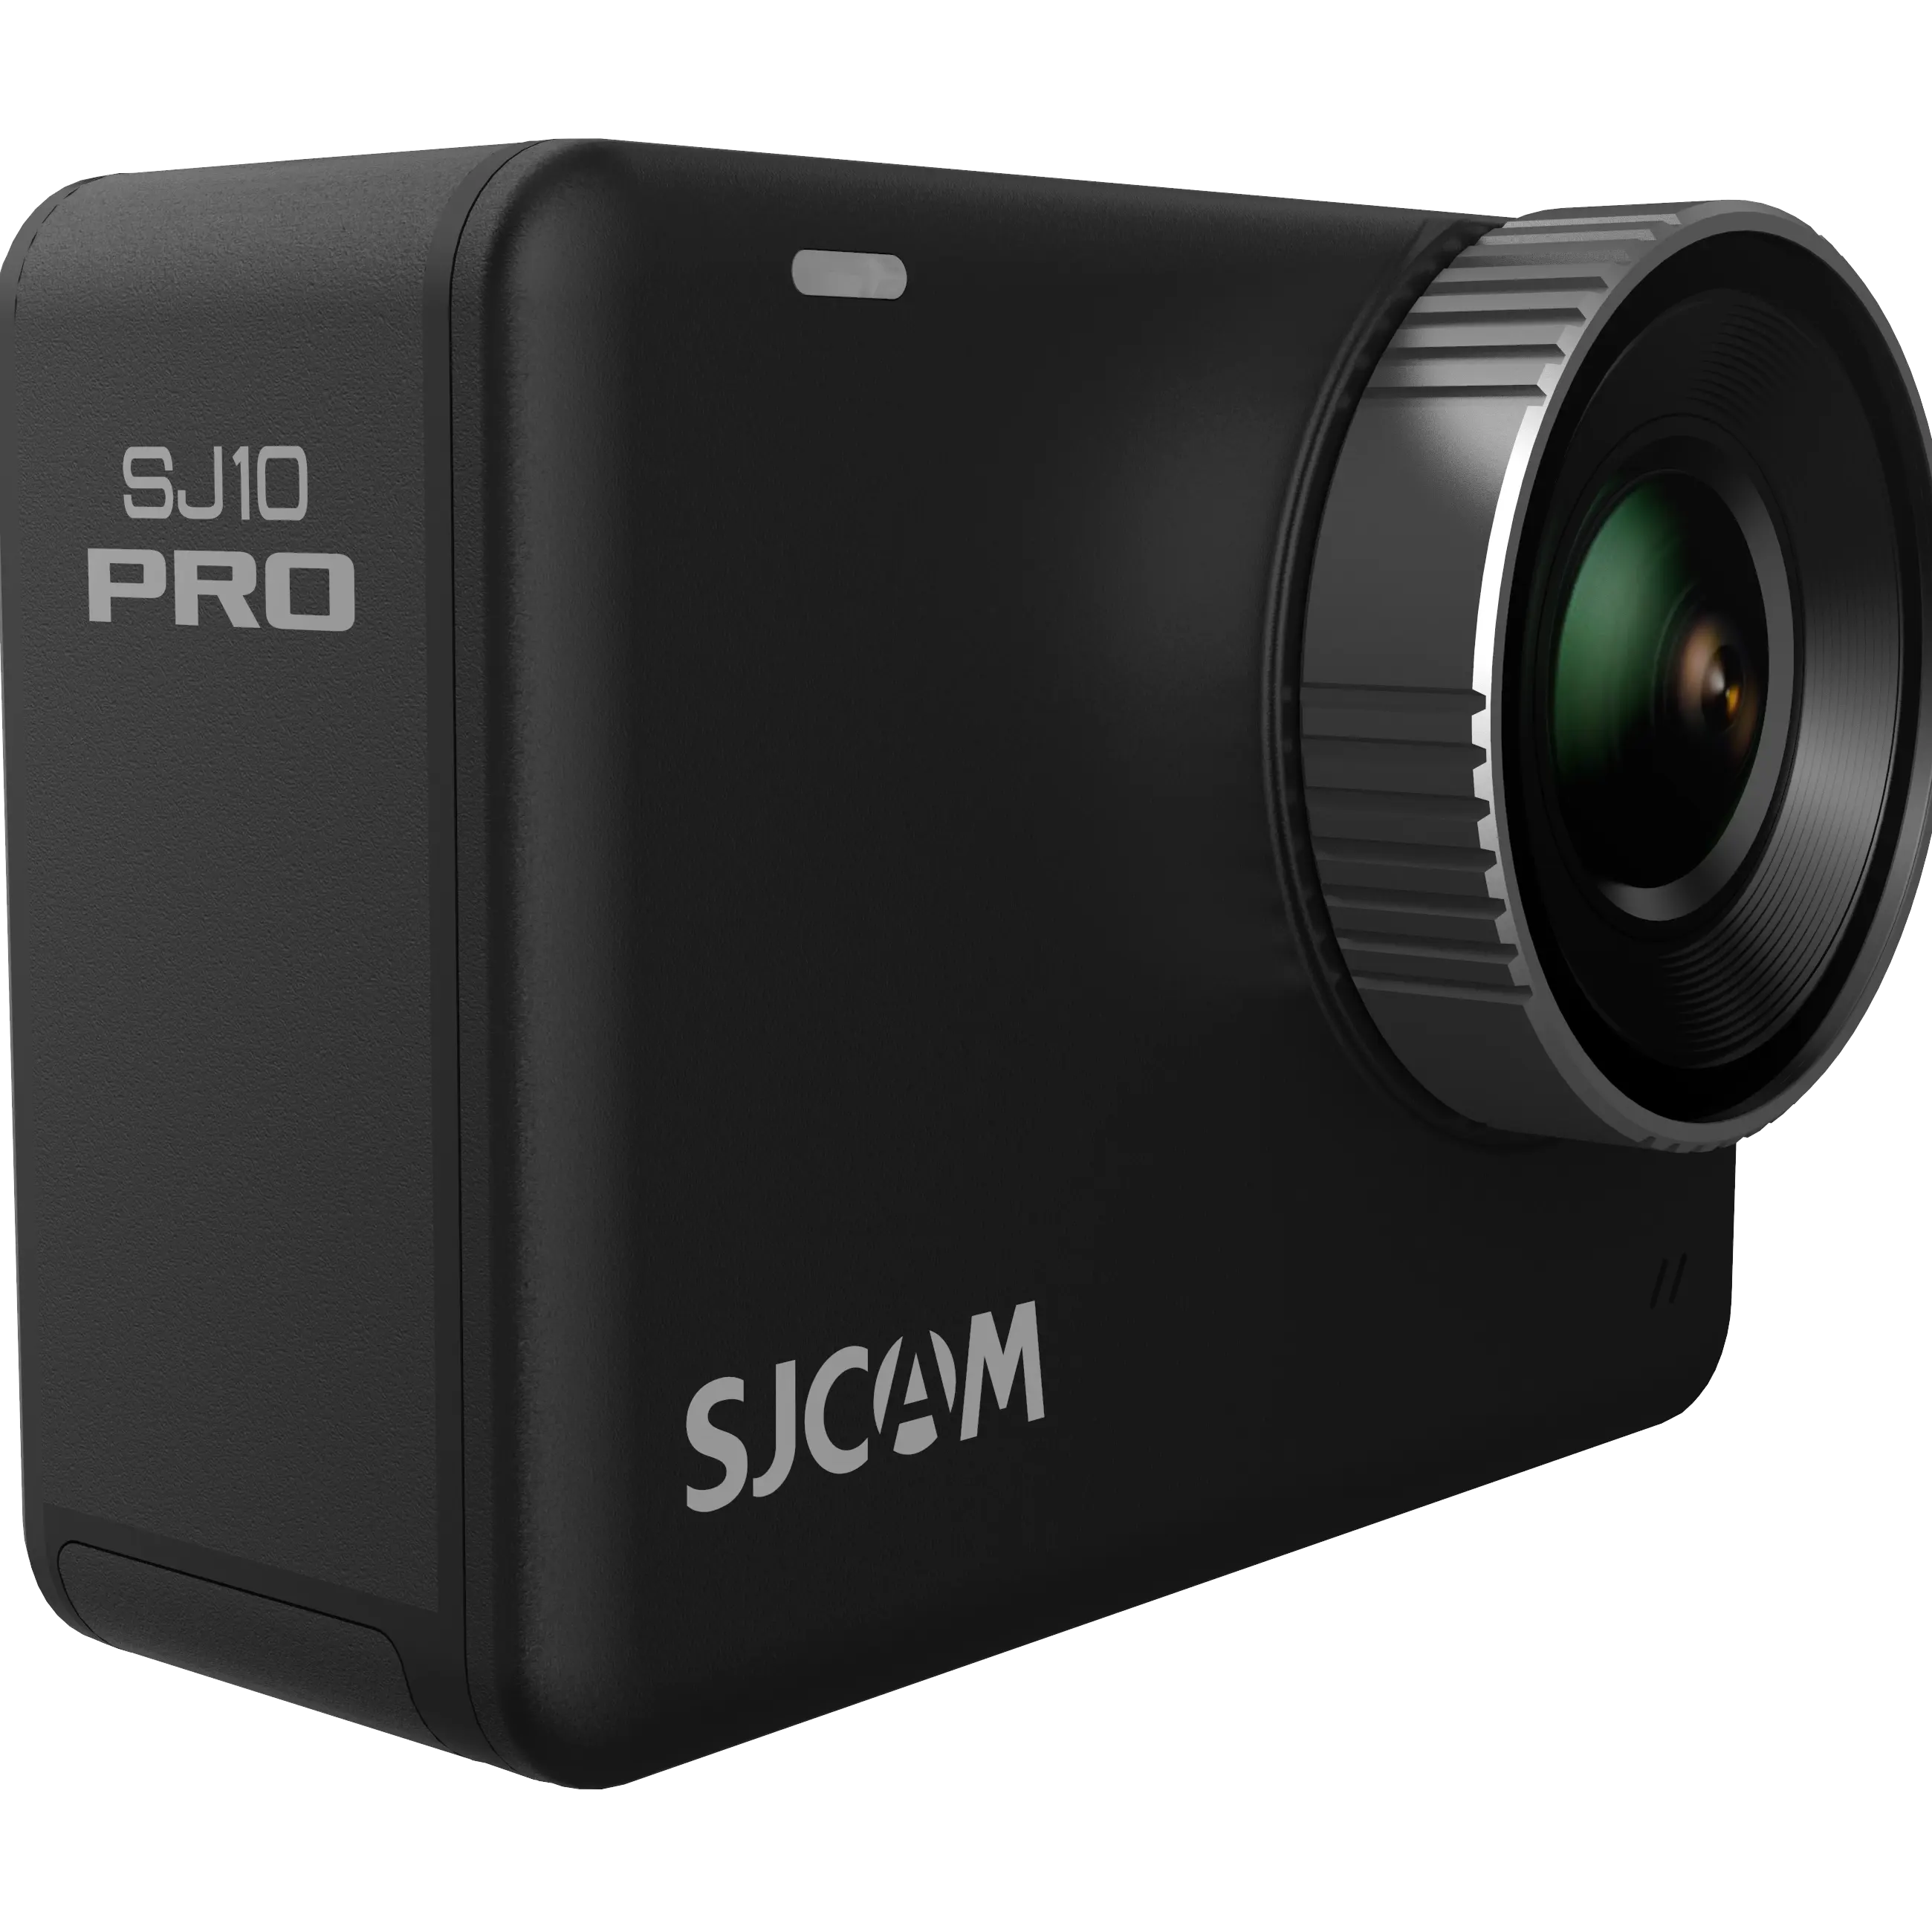 Newest SJCAM factory support 4k/60fps 10m body waterproof without case SJ10 PRO action video camera